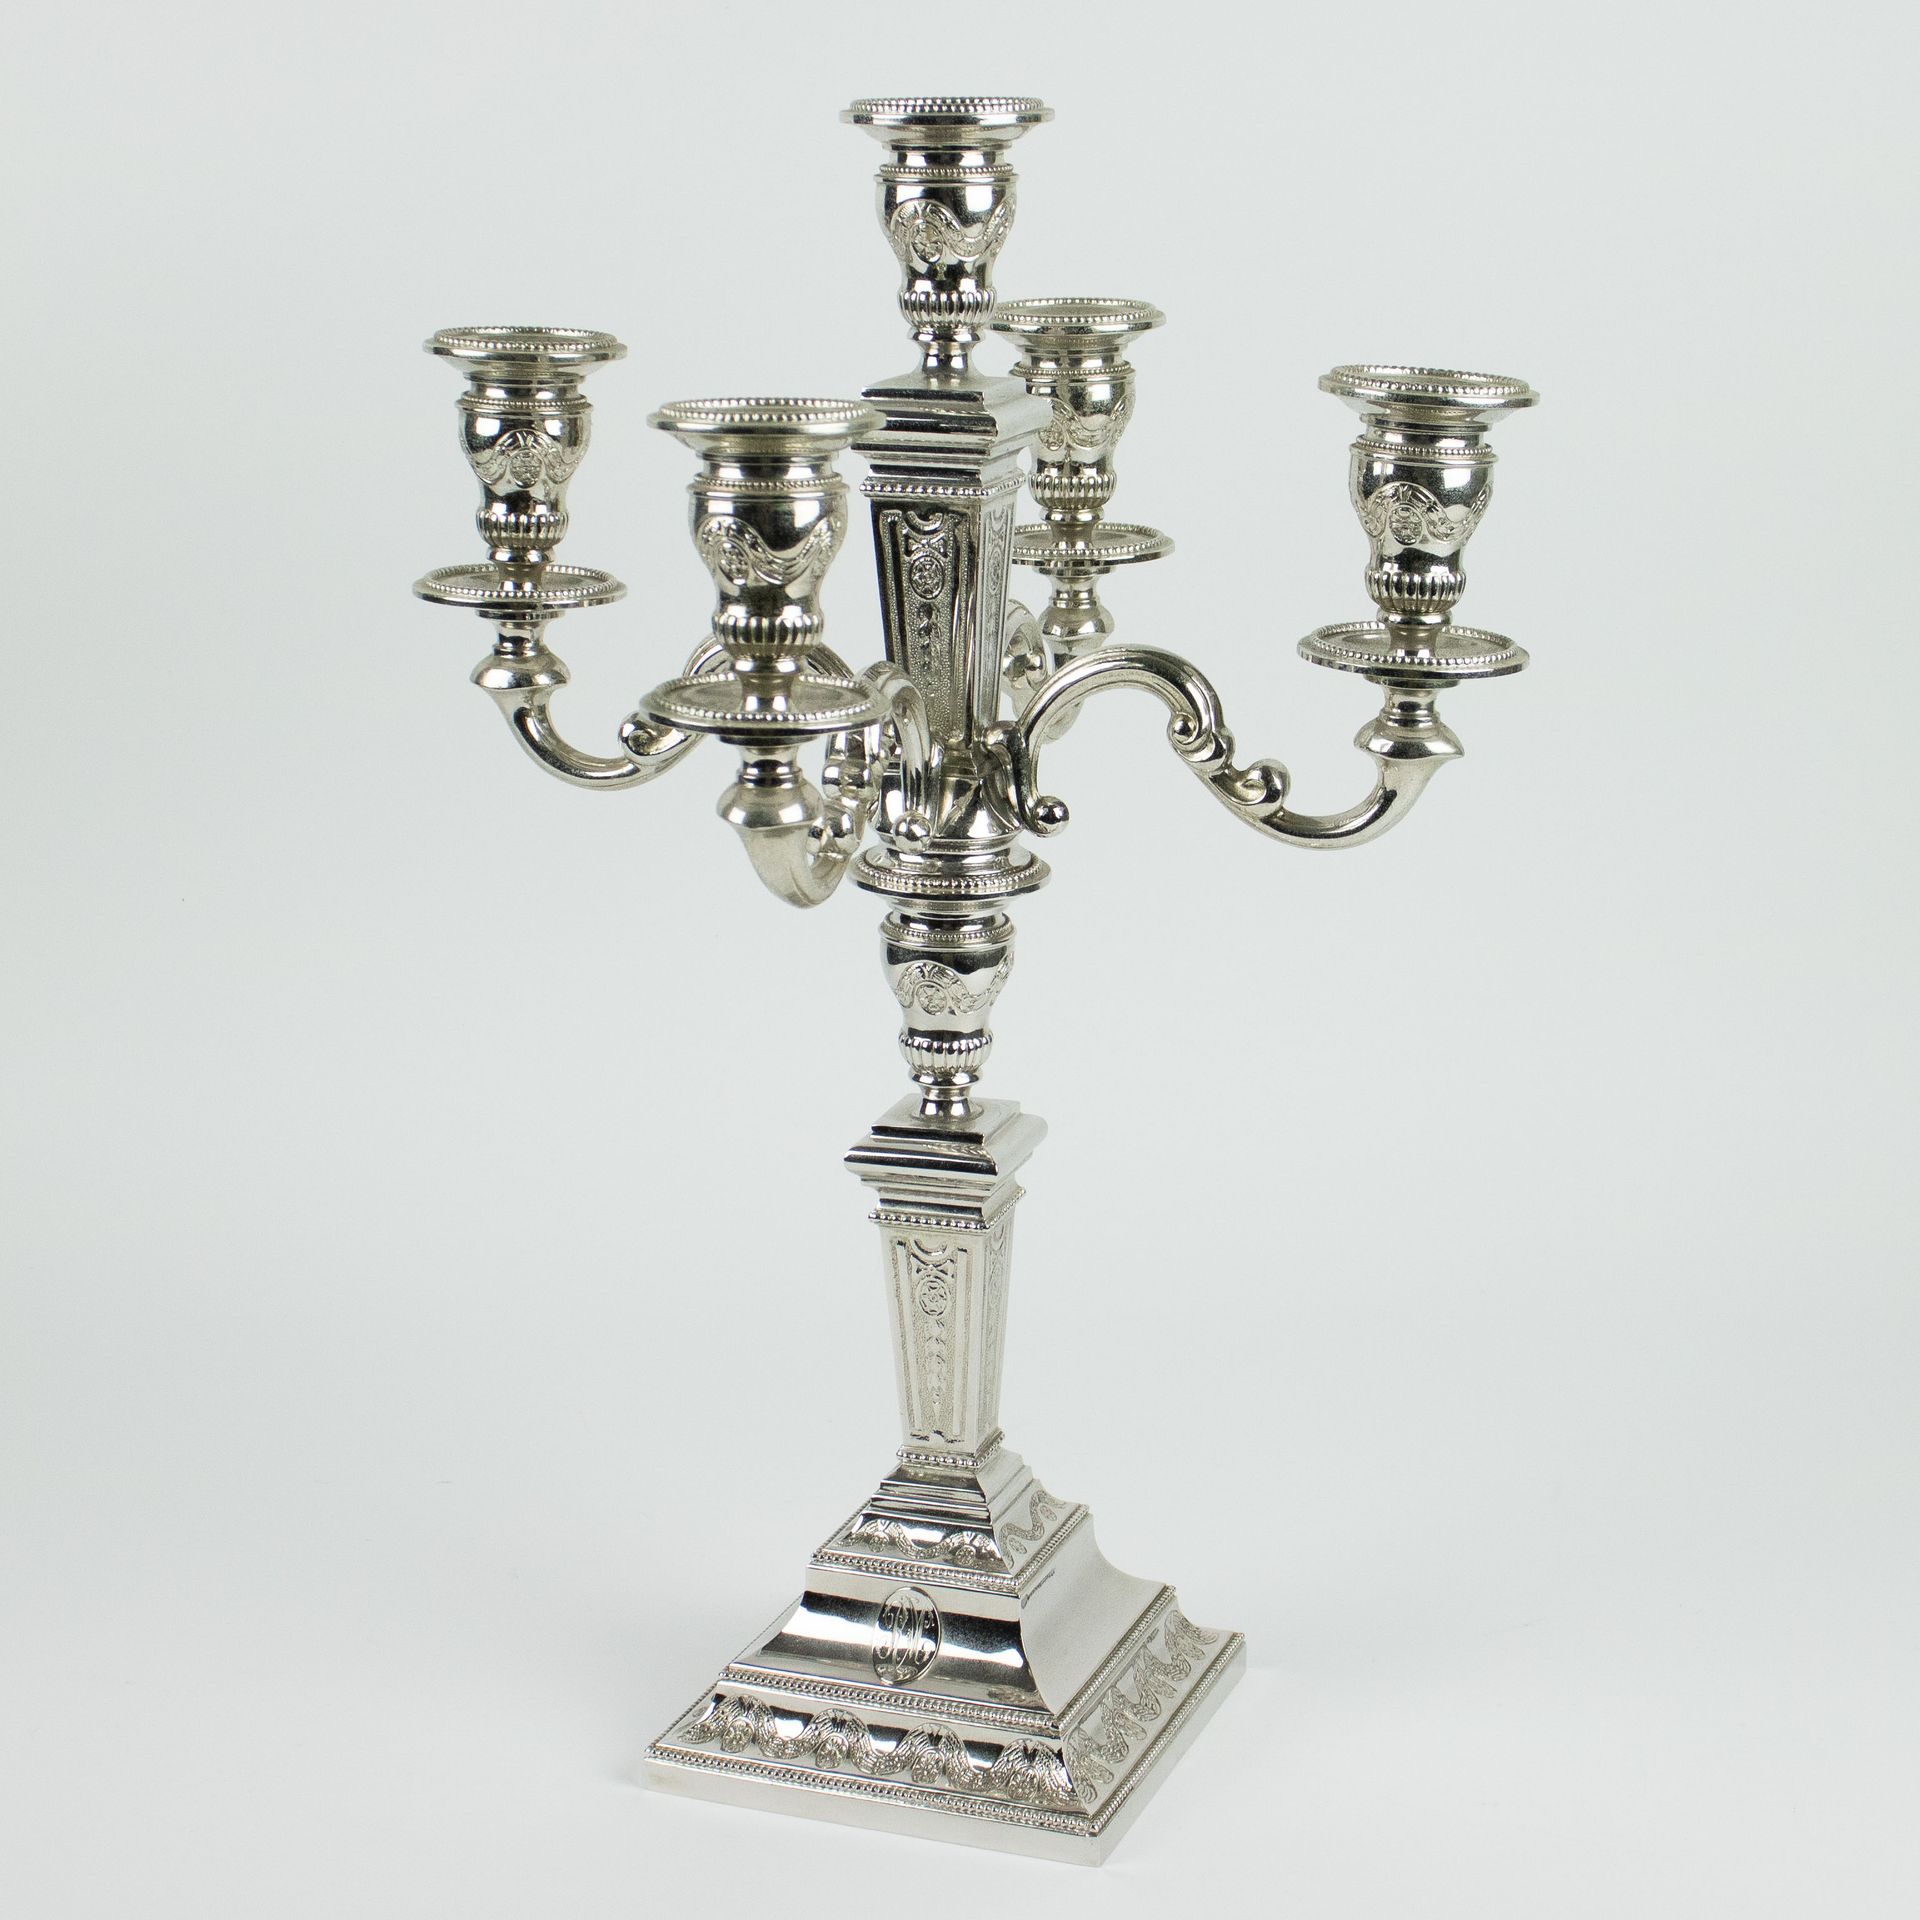 Silver candlestick with 5 arms 
高41.5厘米，有5个扶手。